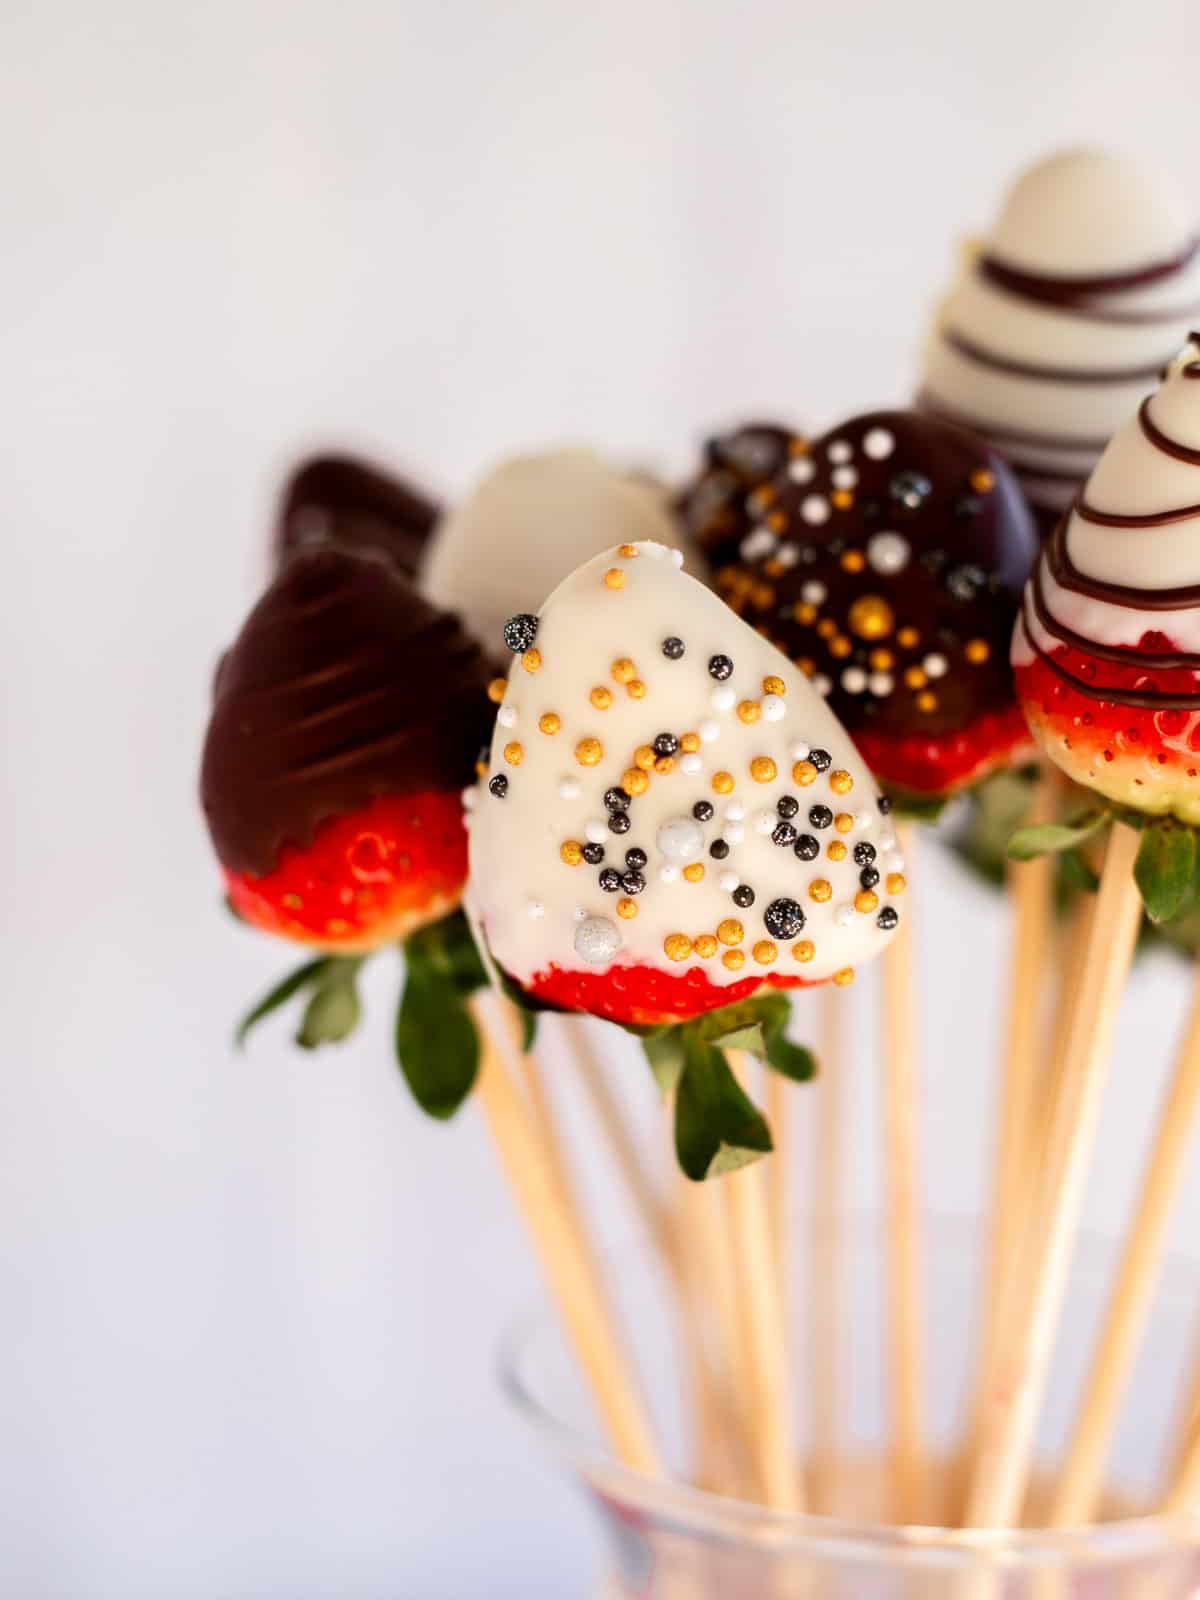 close up photo of chocolate covered strawberries on a stick in a vase.